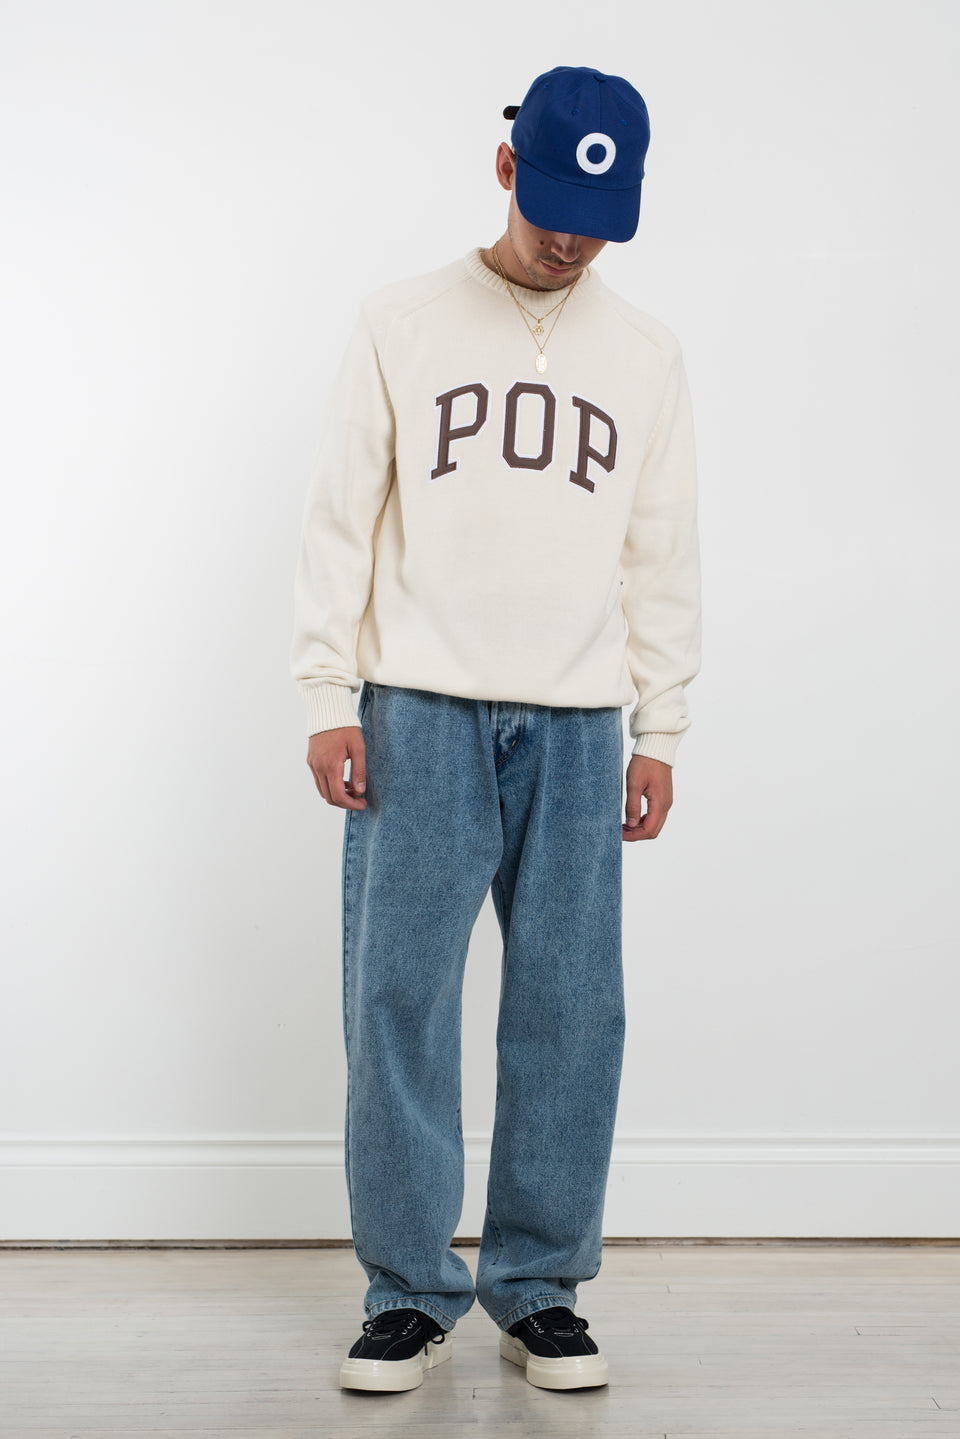 Pop Trading Company AW22 FW22 Arch Knitted Crewneck Off-White Calculus Victoria BC Canada